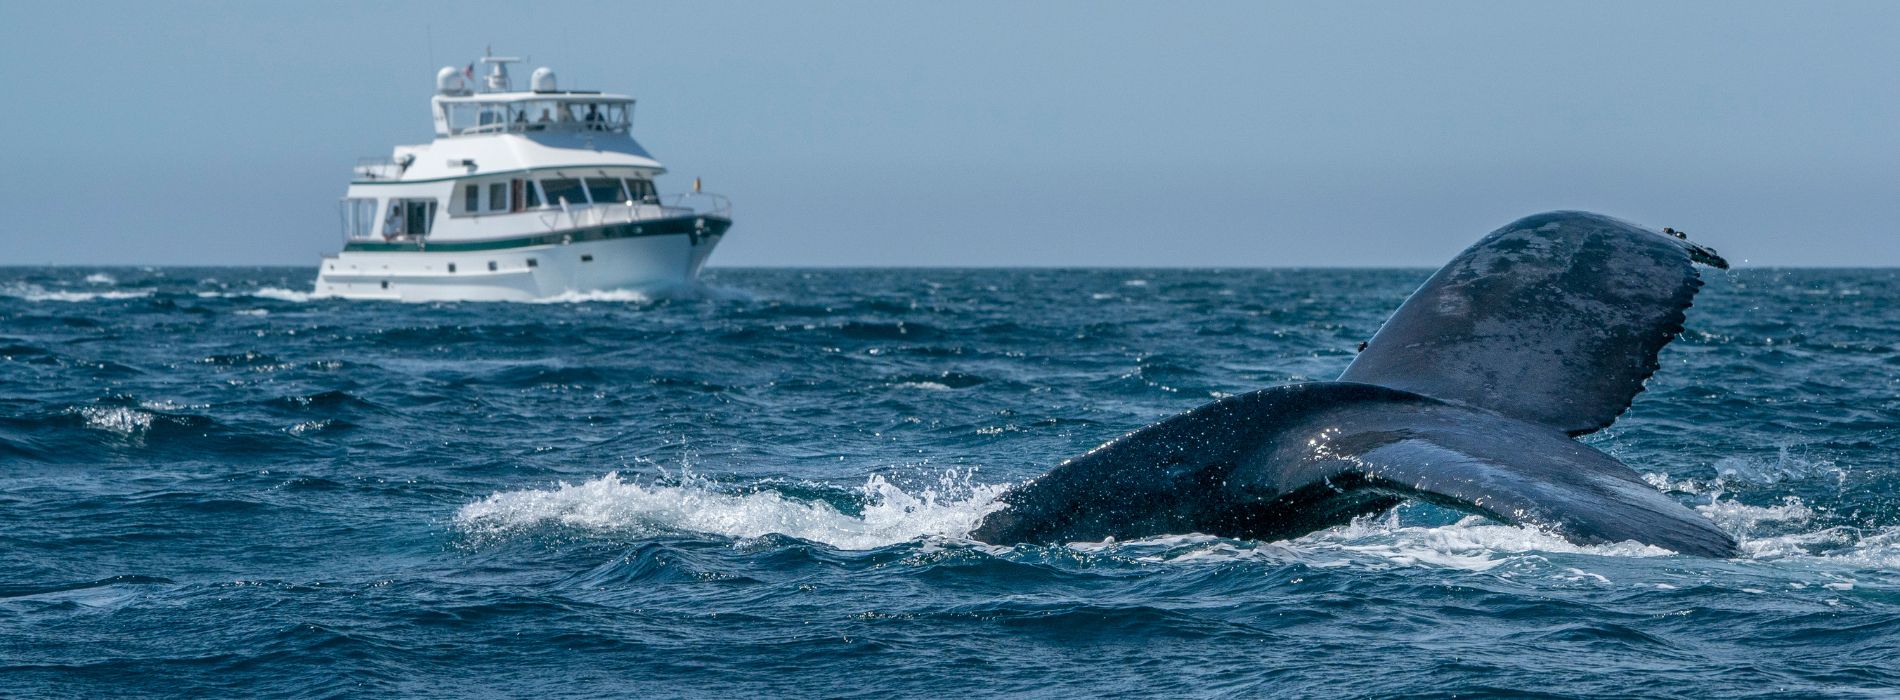 Best Whale Watching Tour in Oahu - A Spectacular Experience